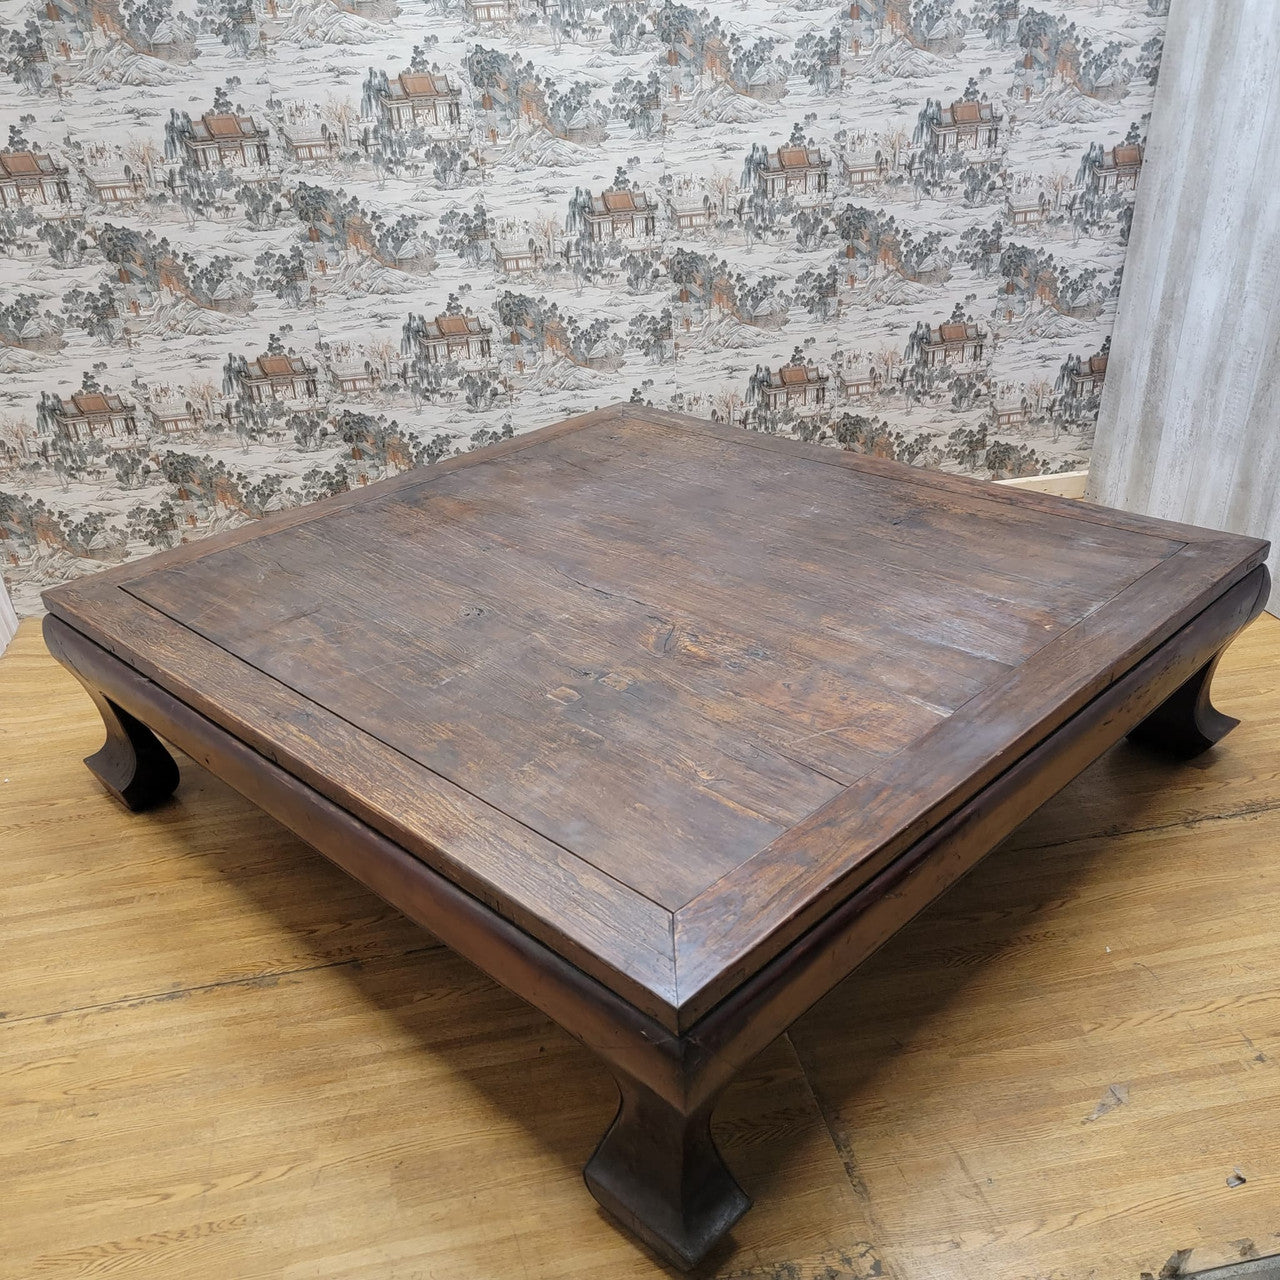 Antique Shanxi Province Chinese Elm Coffee Table / Bed